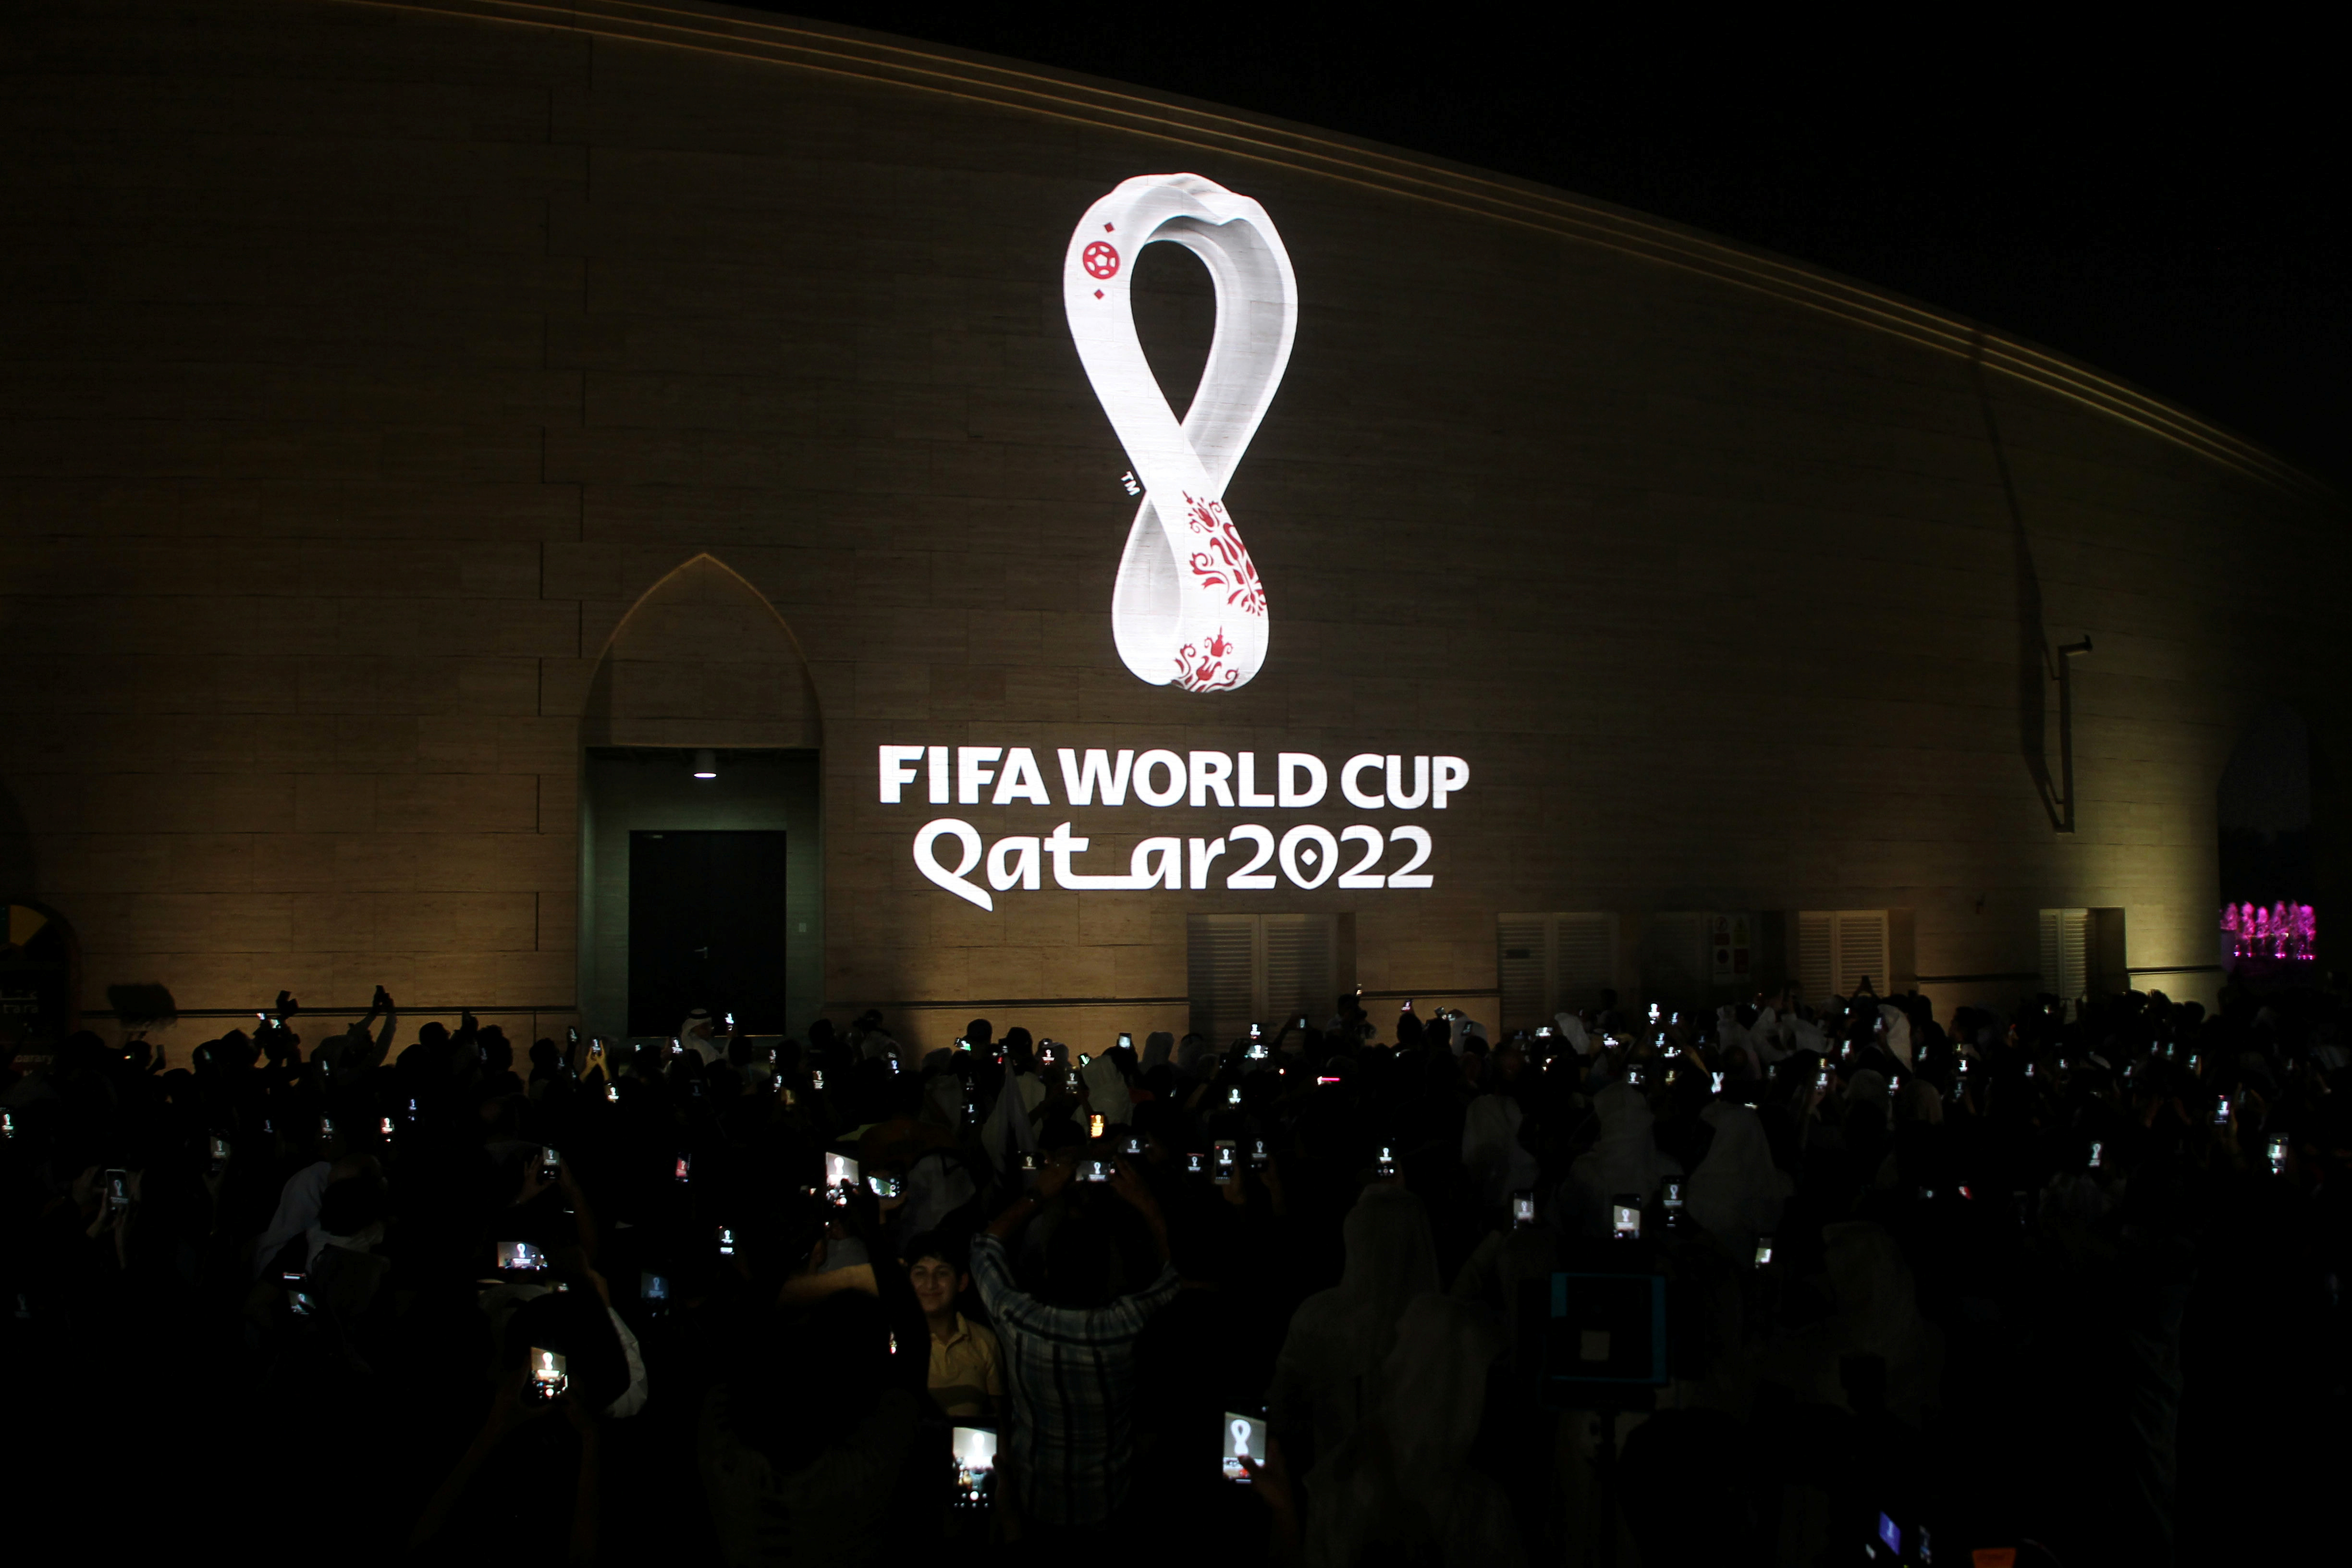 The tournament's official logo for the 2022 Qatar World Cup is seen on the wall of an amphitheater, in Doha